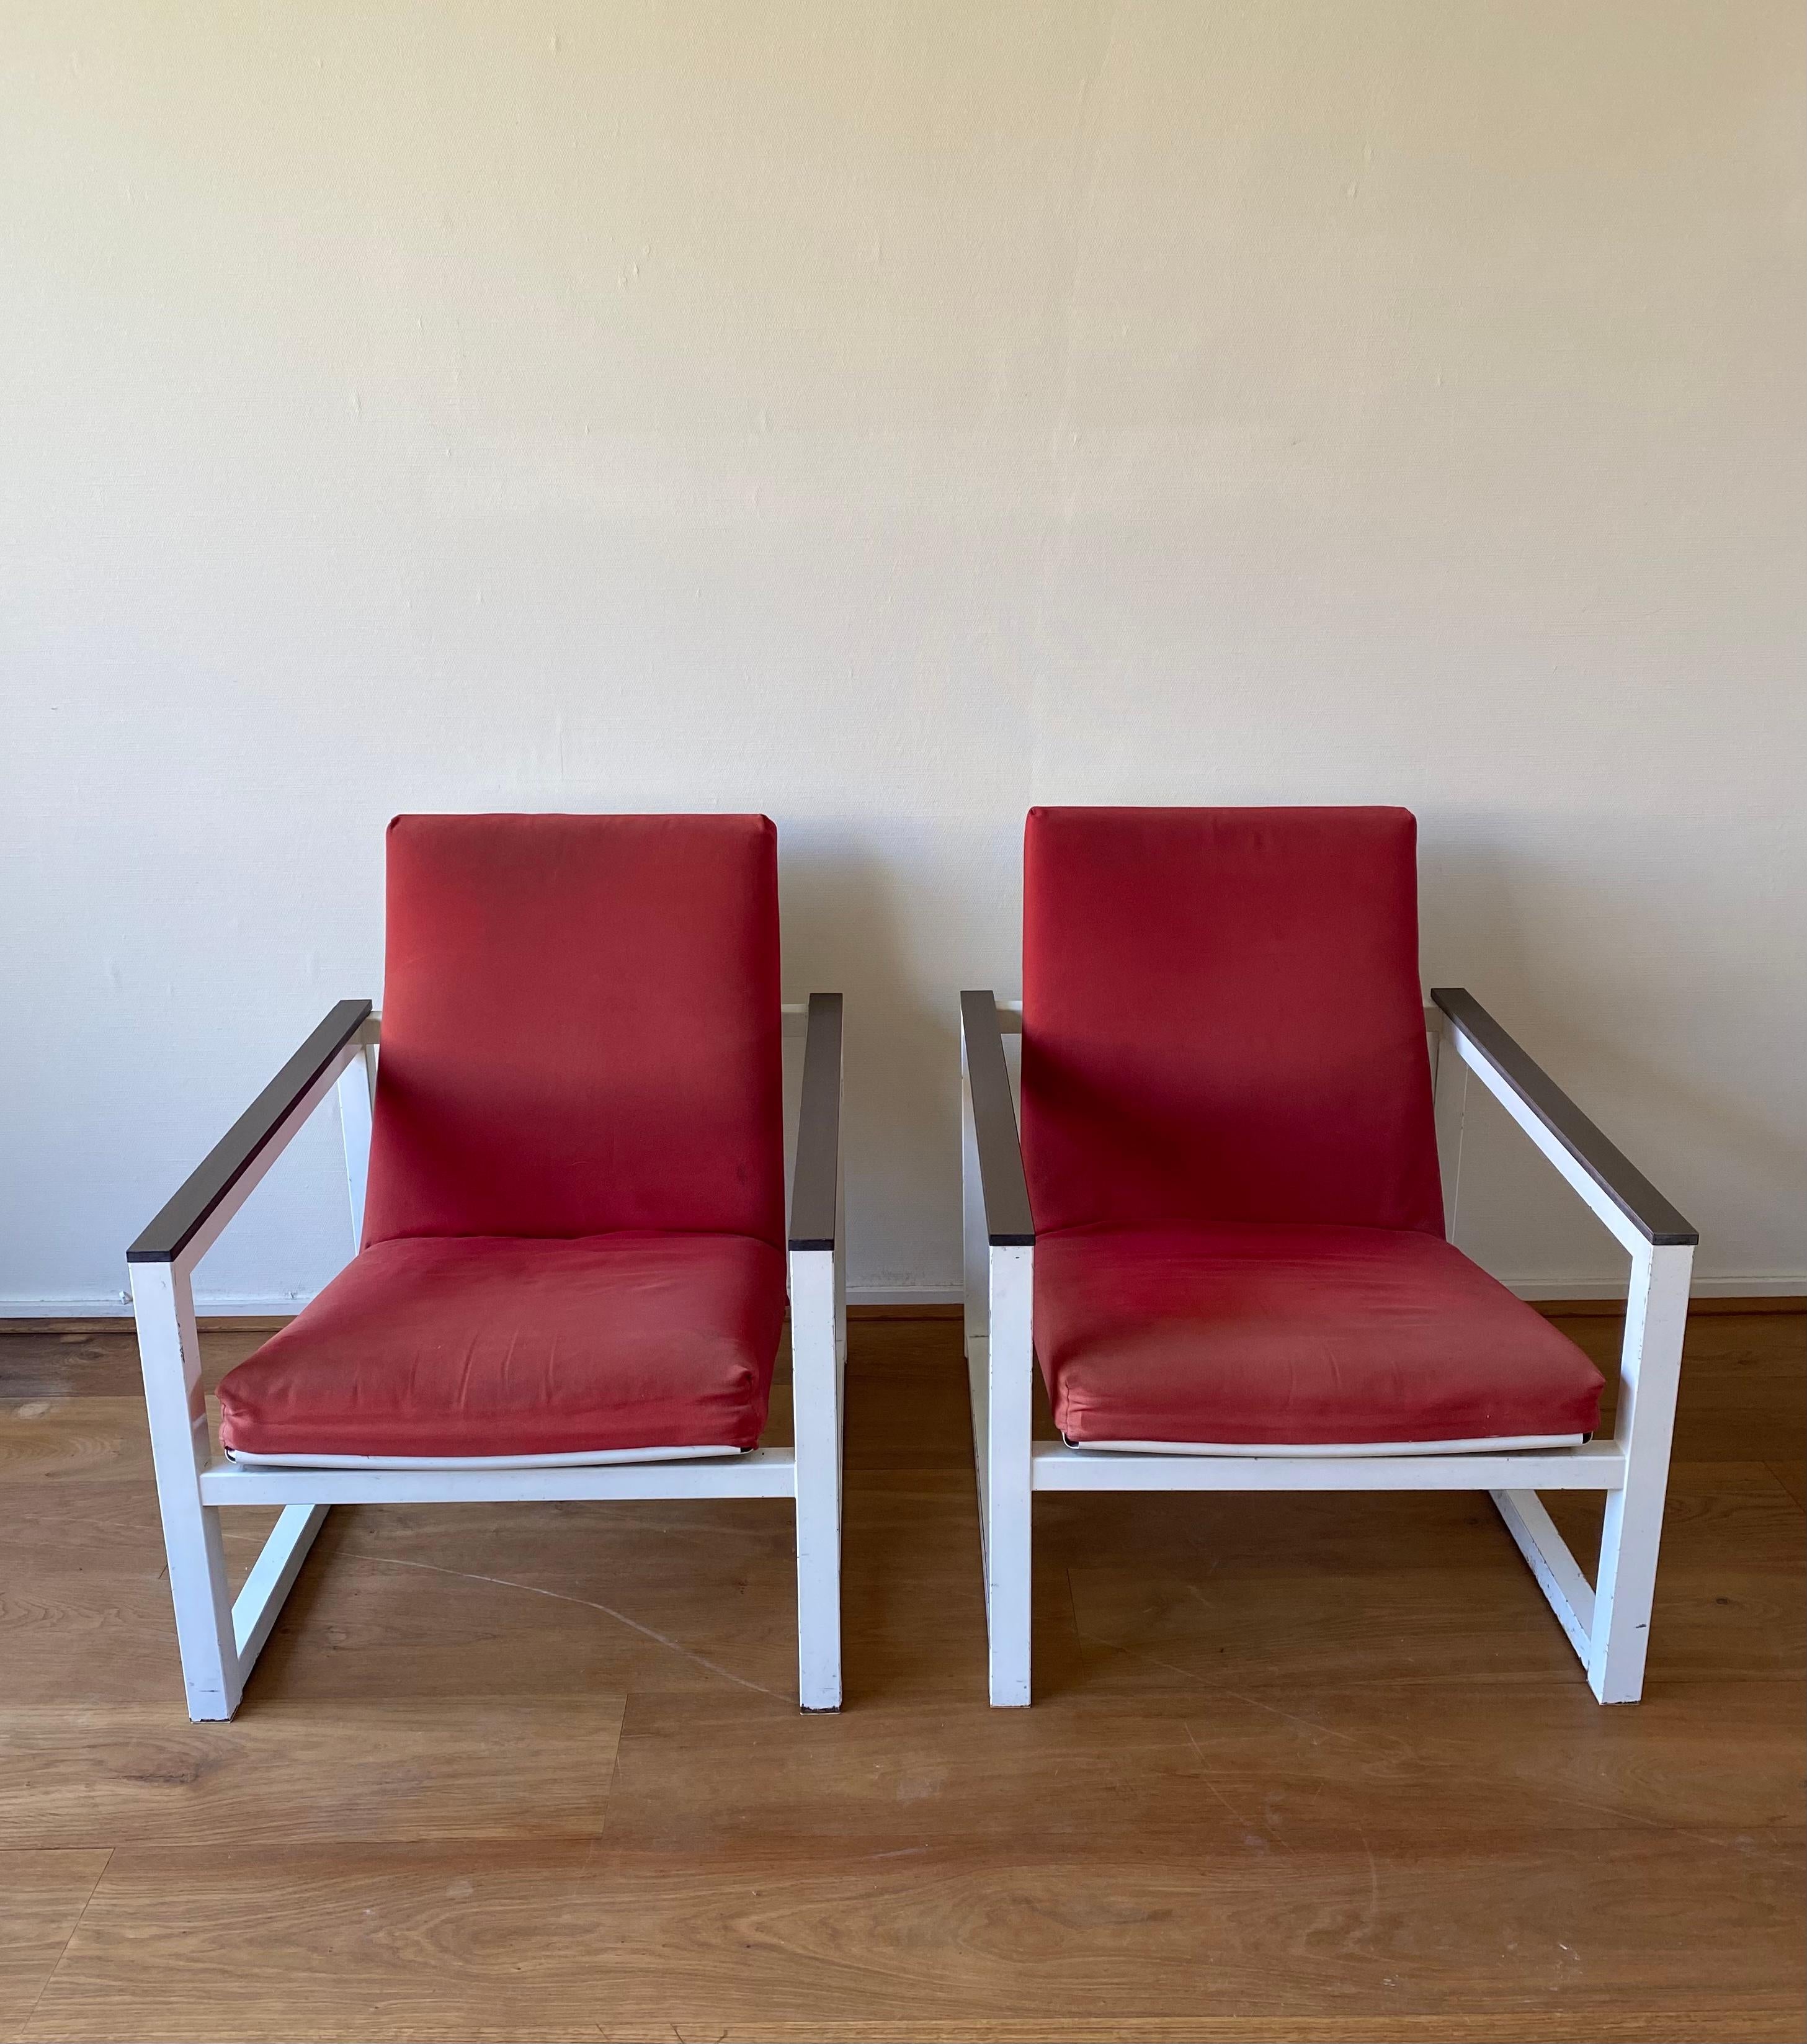 Rare Lounge chairs designed by Tjerk Reijenga and Friso Kramer for Pilastro in 1965. The chair itself was designed by Tjerk Reijenga for Pilastro in 1965 and the seating part was designed by Friso Kramer for Ahrend de Cirkel 1959. The chairs have a